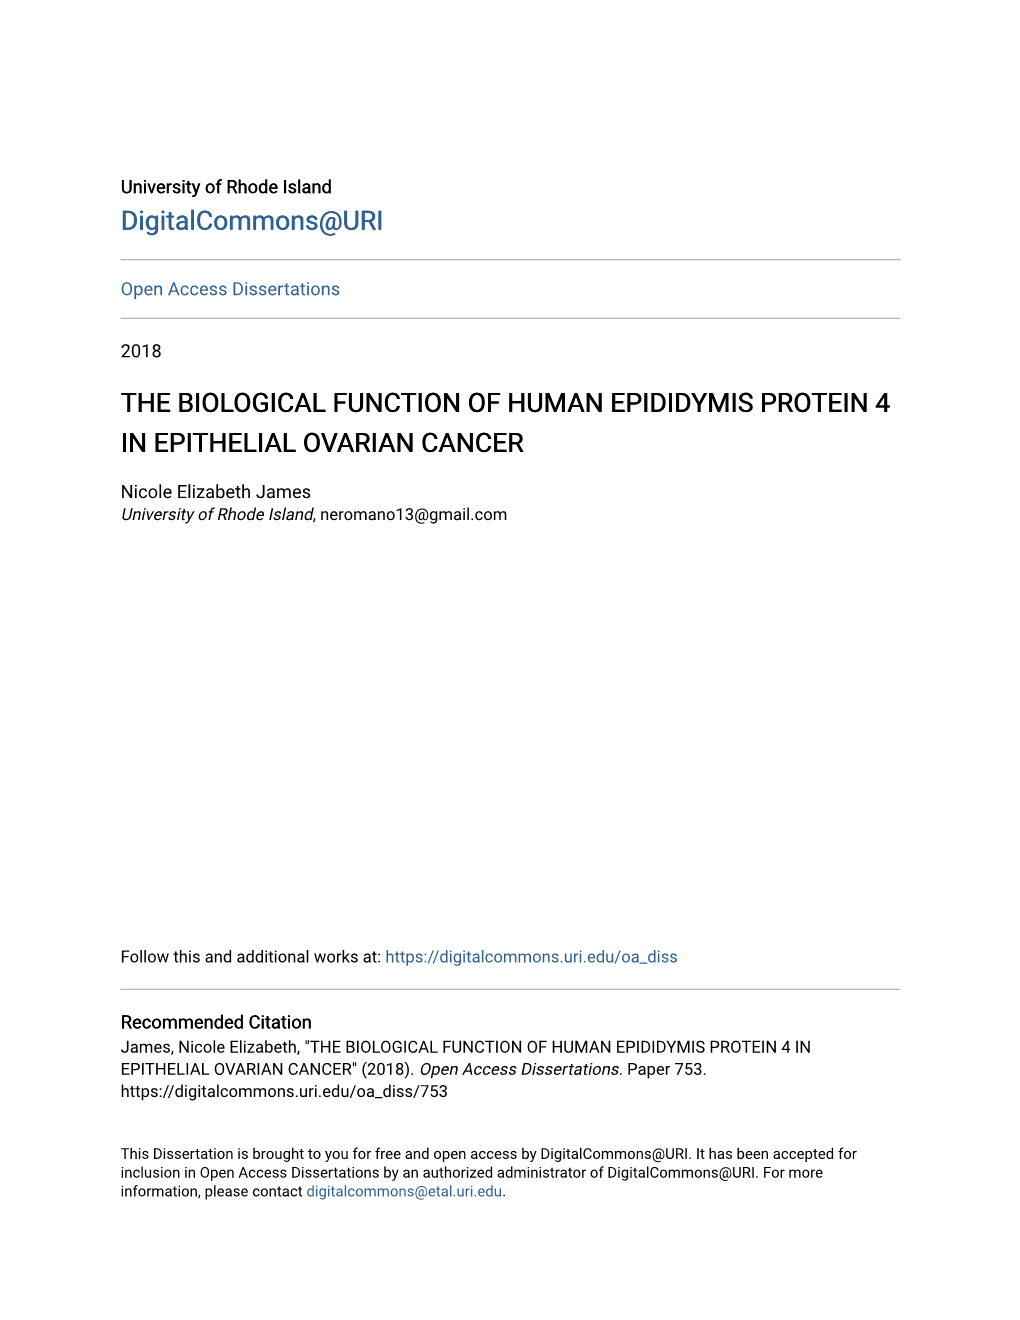 The Biological Function of Human Epididymis Protein 4 in Epithelial Ovarian Cancer